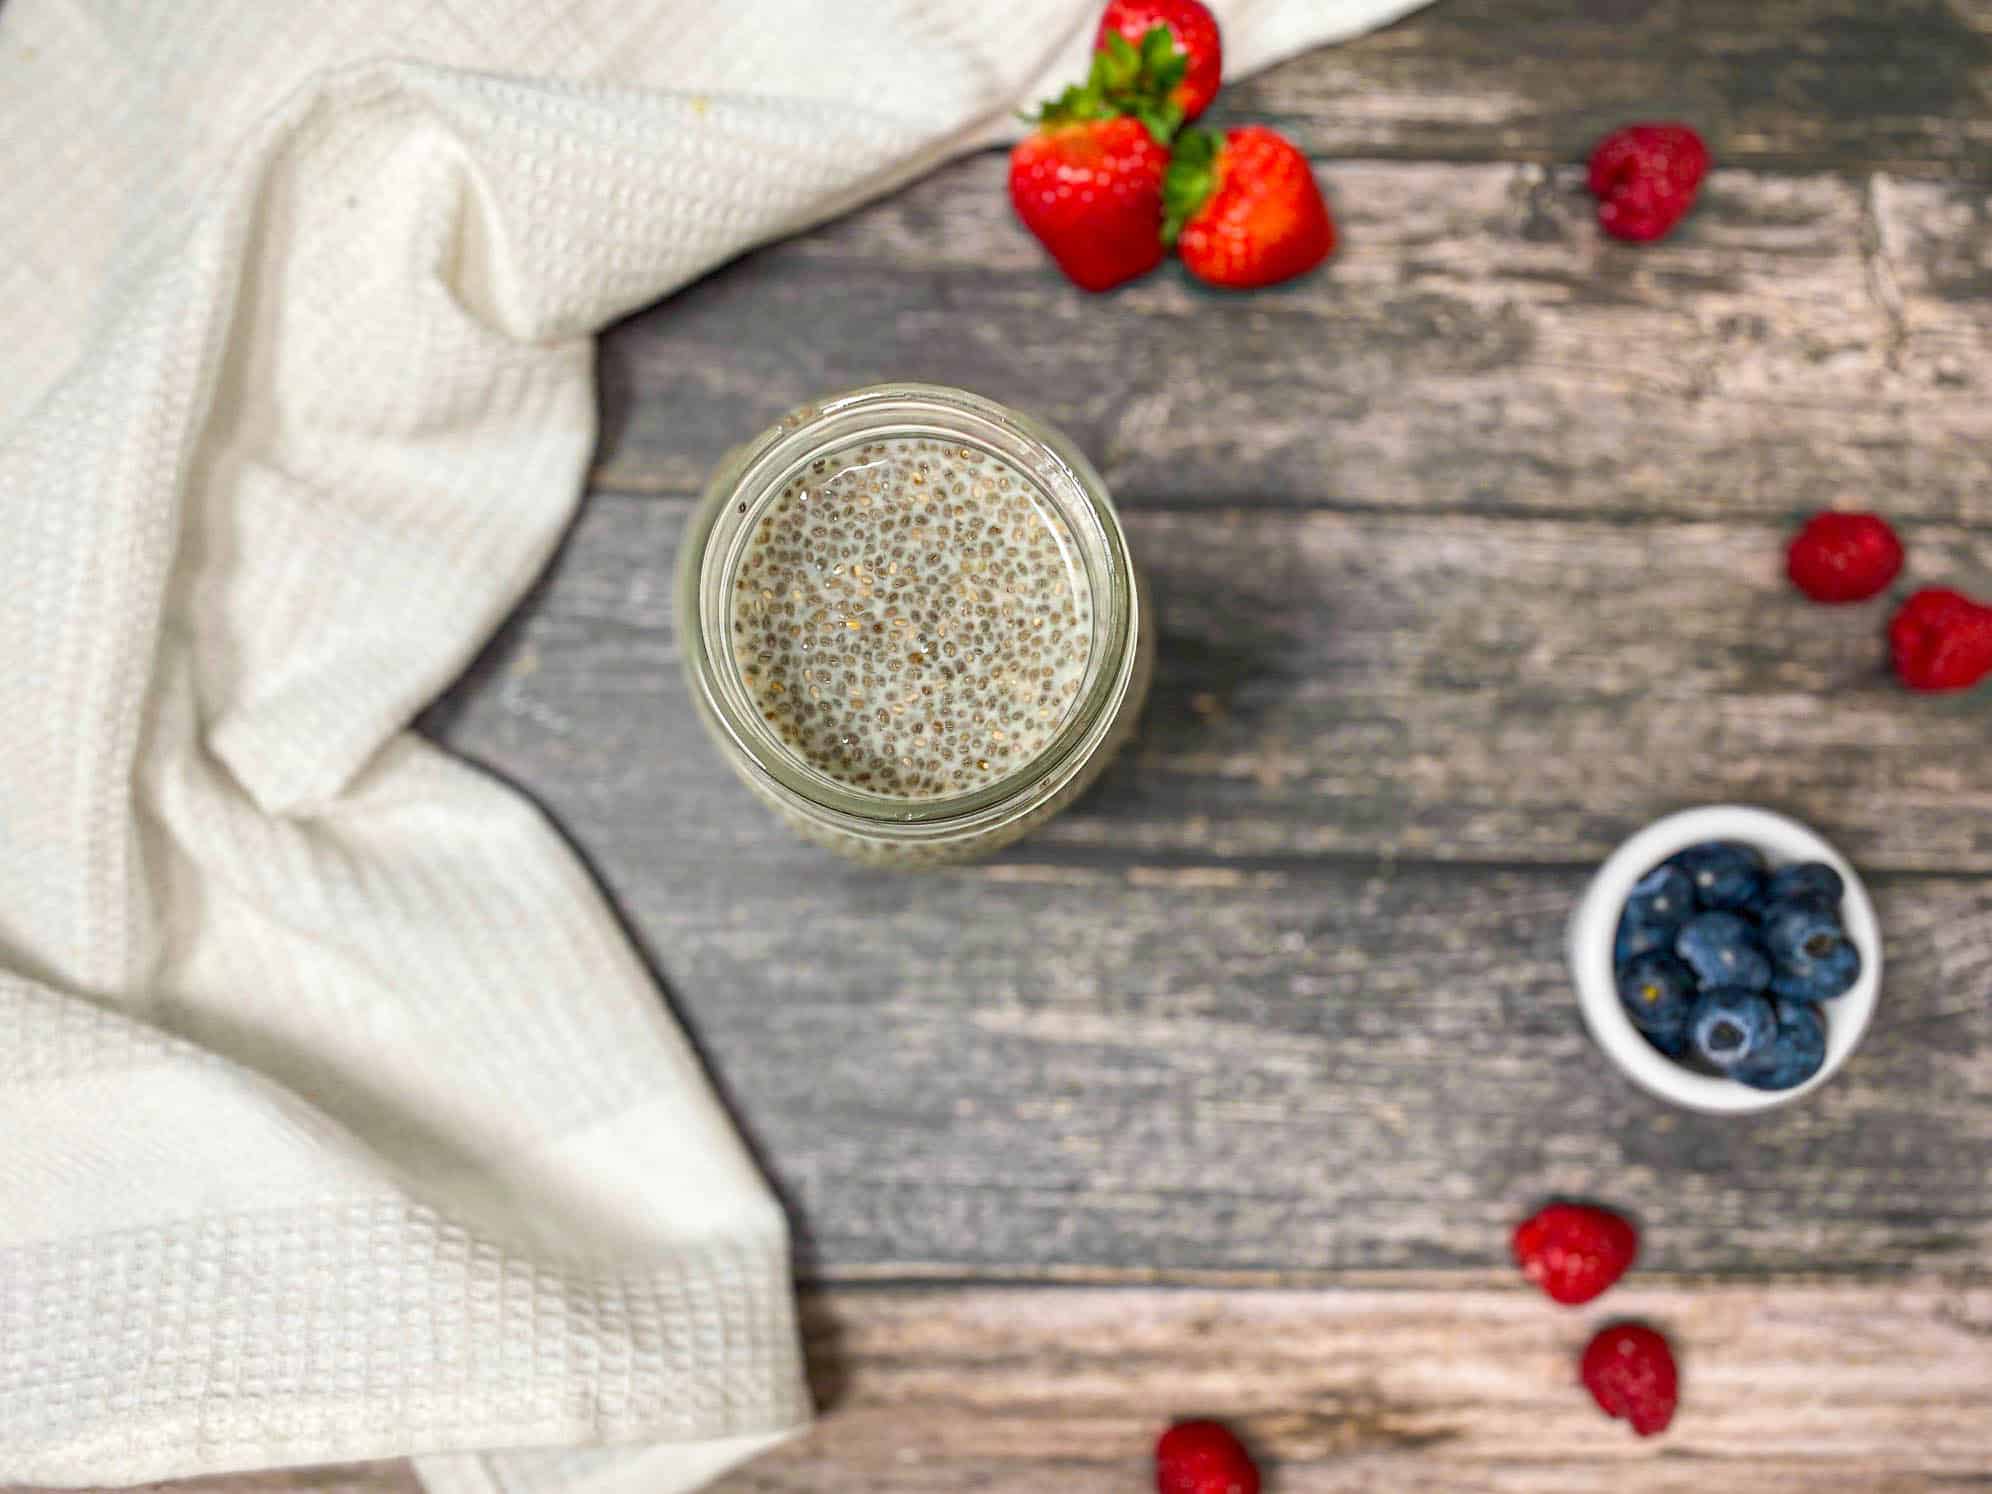 Over head view of glass jar with milk and chia seeds inside and berries around it.